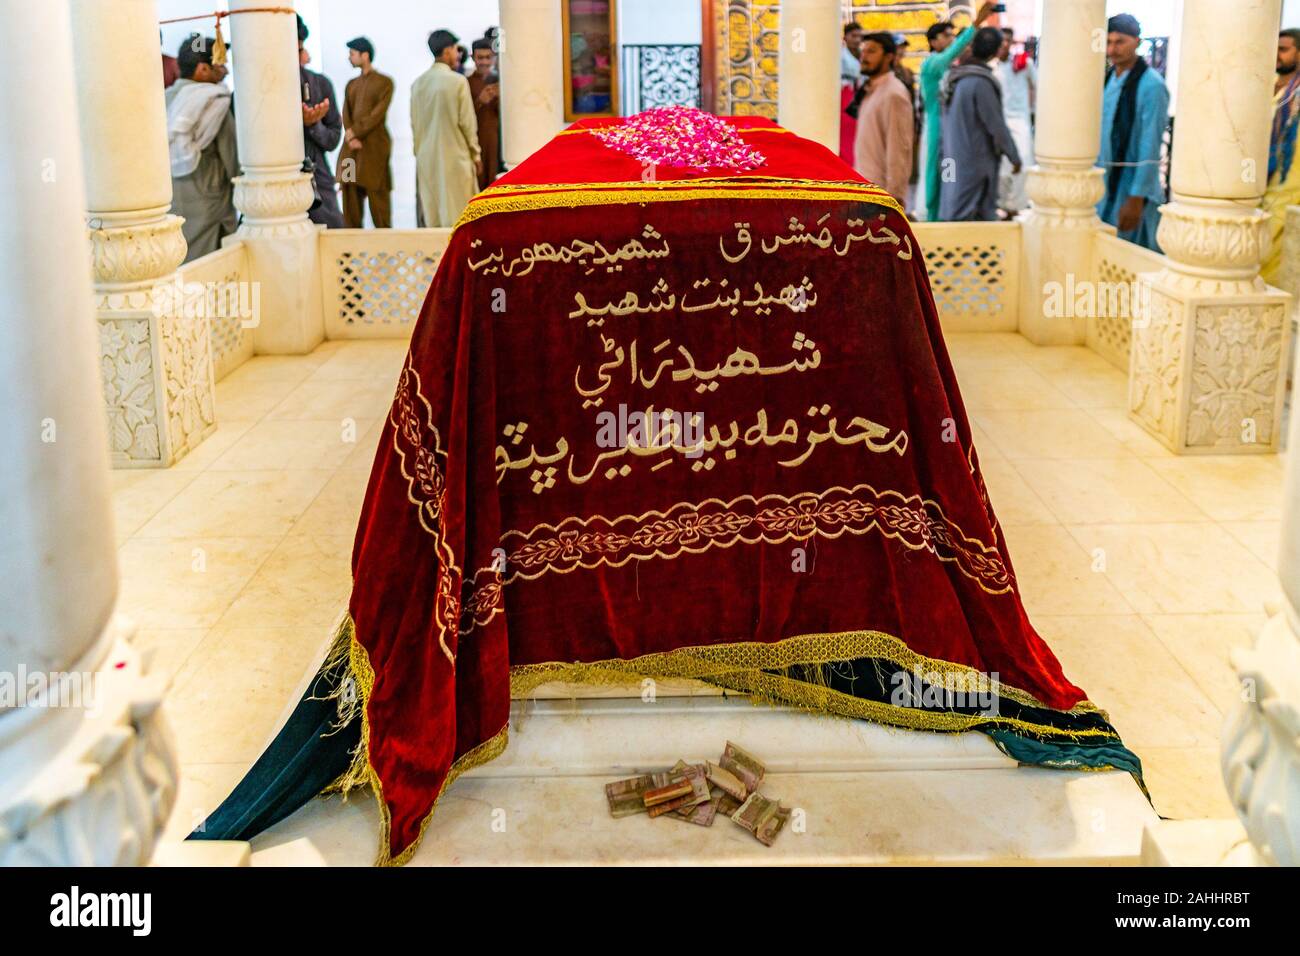 Larkana Bhutto Family Mausoleum Picturesque Interior View of Martyr Shaheed Benazir's Tomb Covered with Arabic Urdu Script Stock Photo